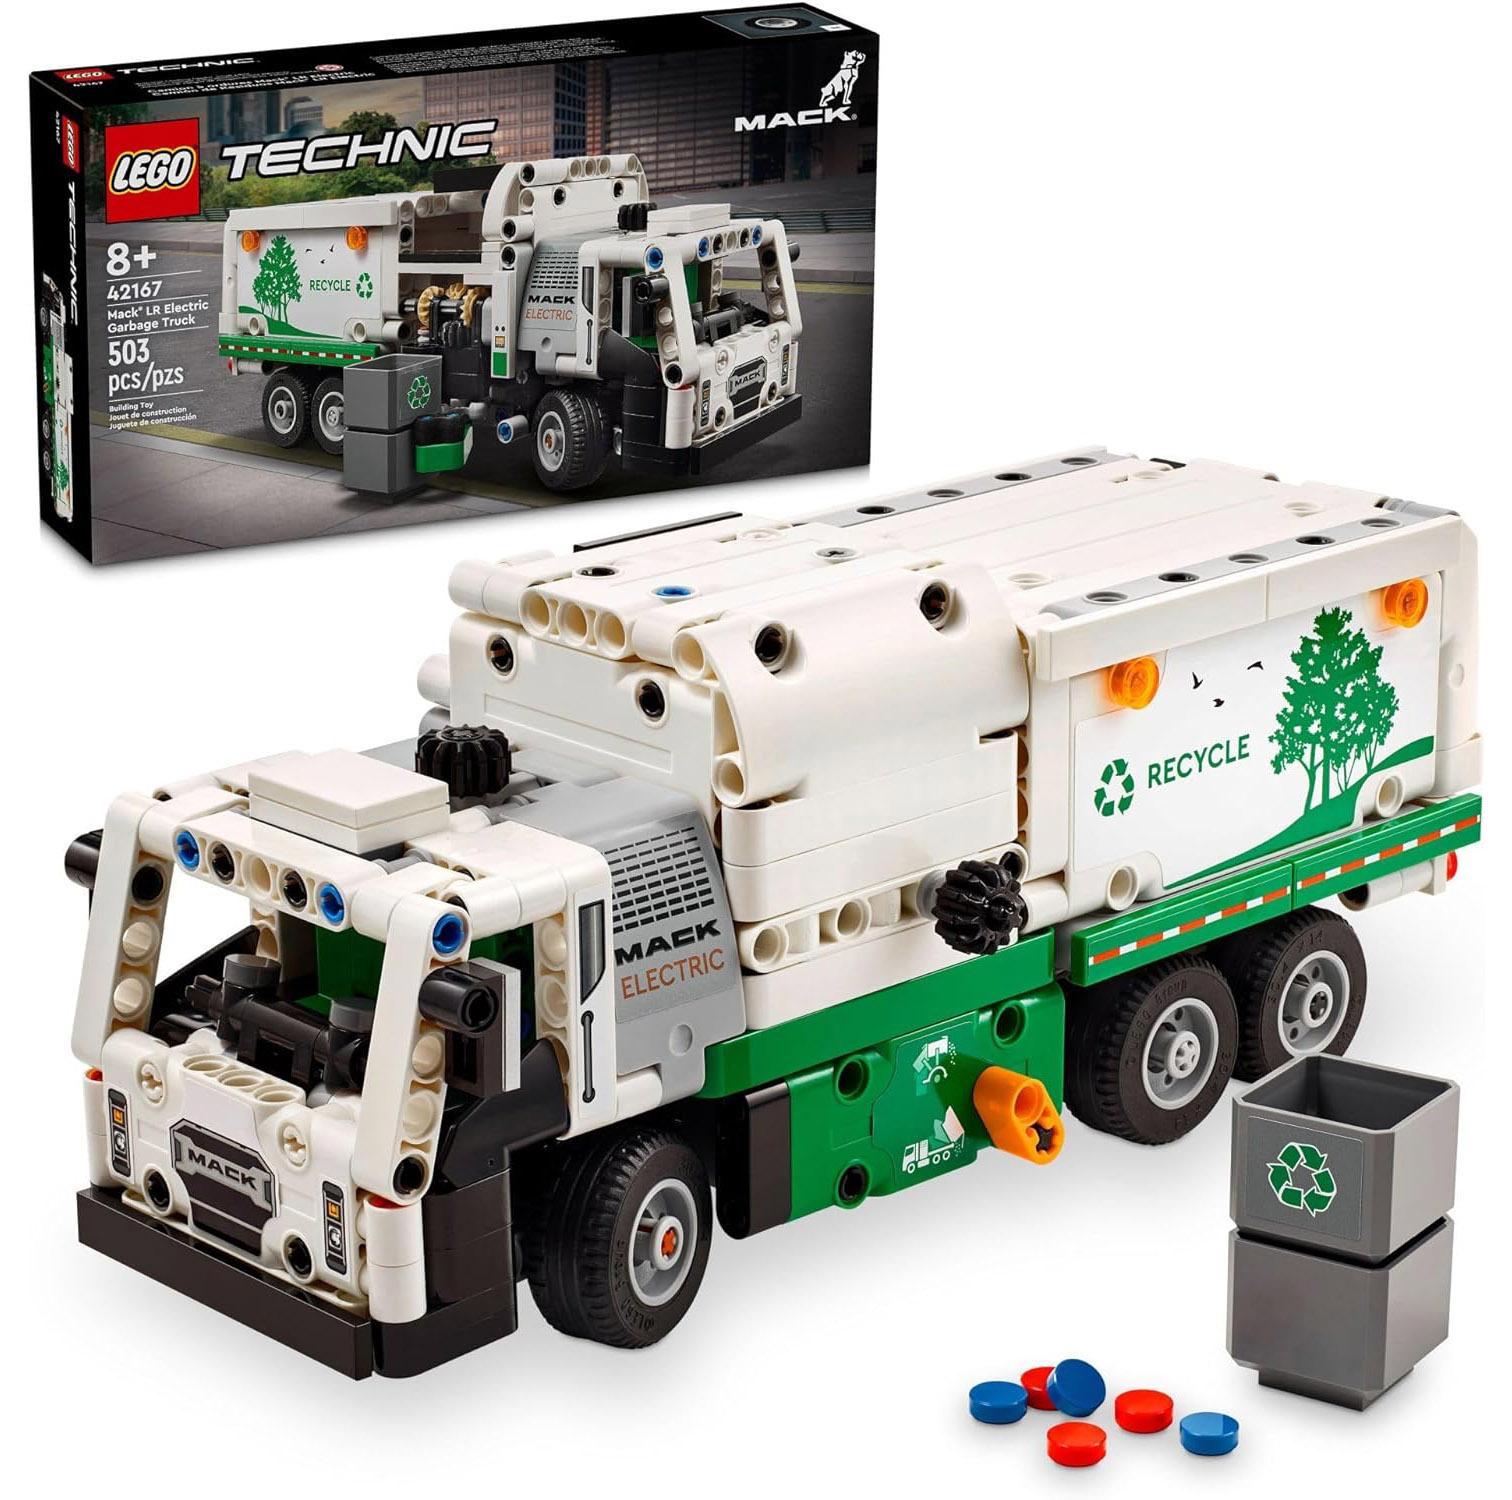 LEGO Technic Mack LR Electric Garbage Truck Toy for $26.39